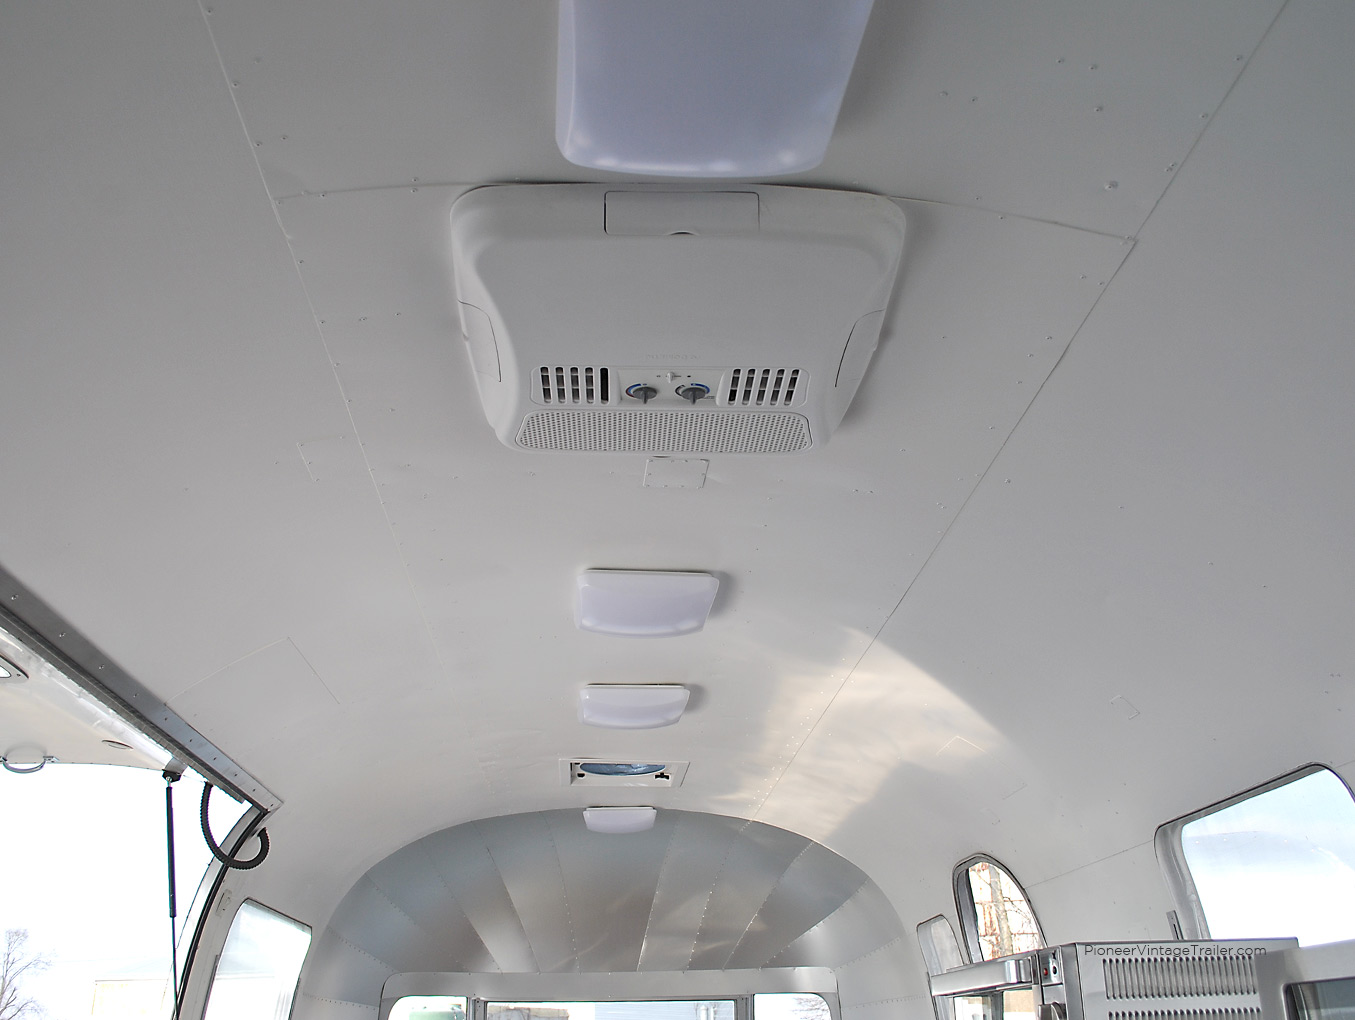 LED ceiling lights and AC unit - food trailer